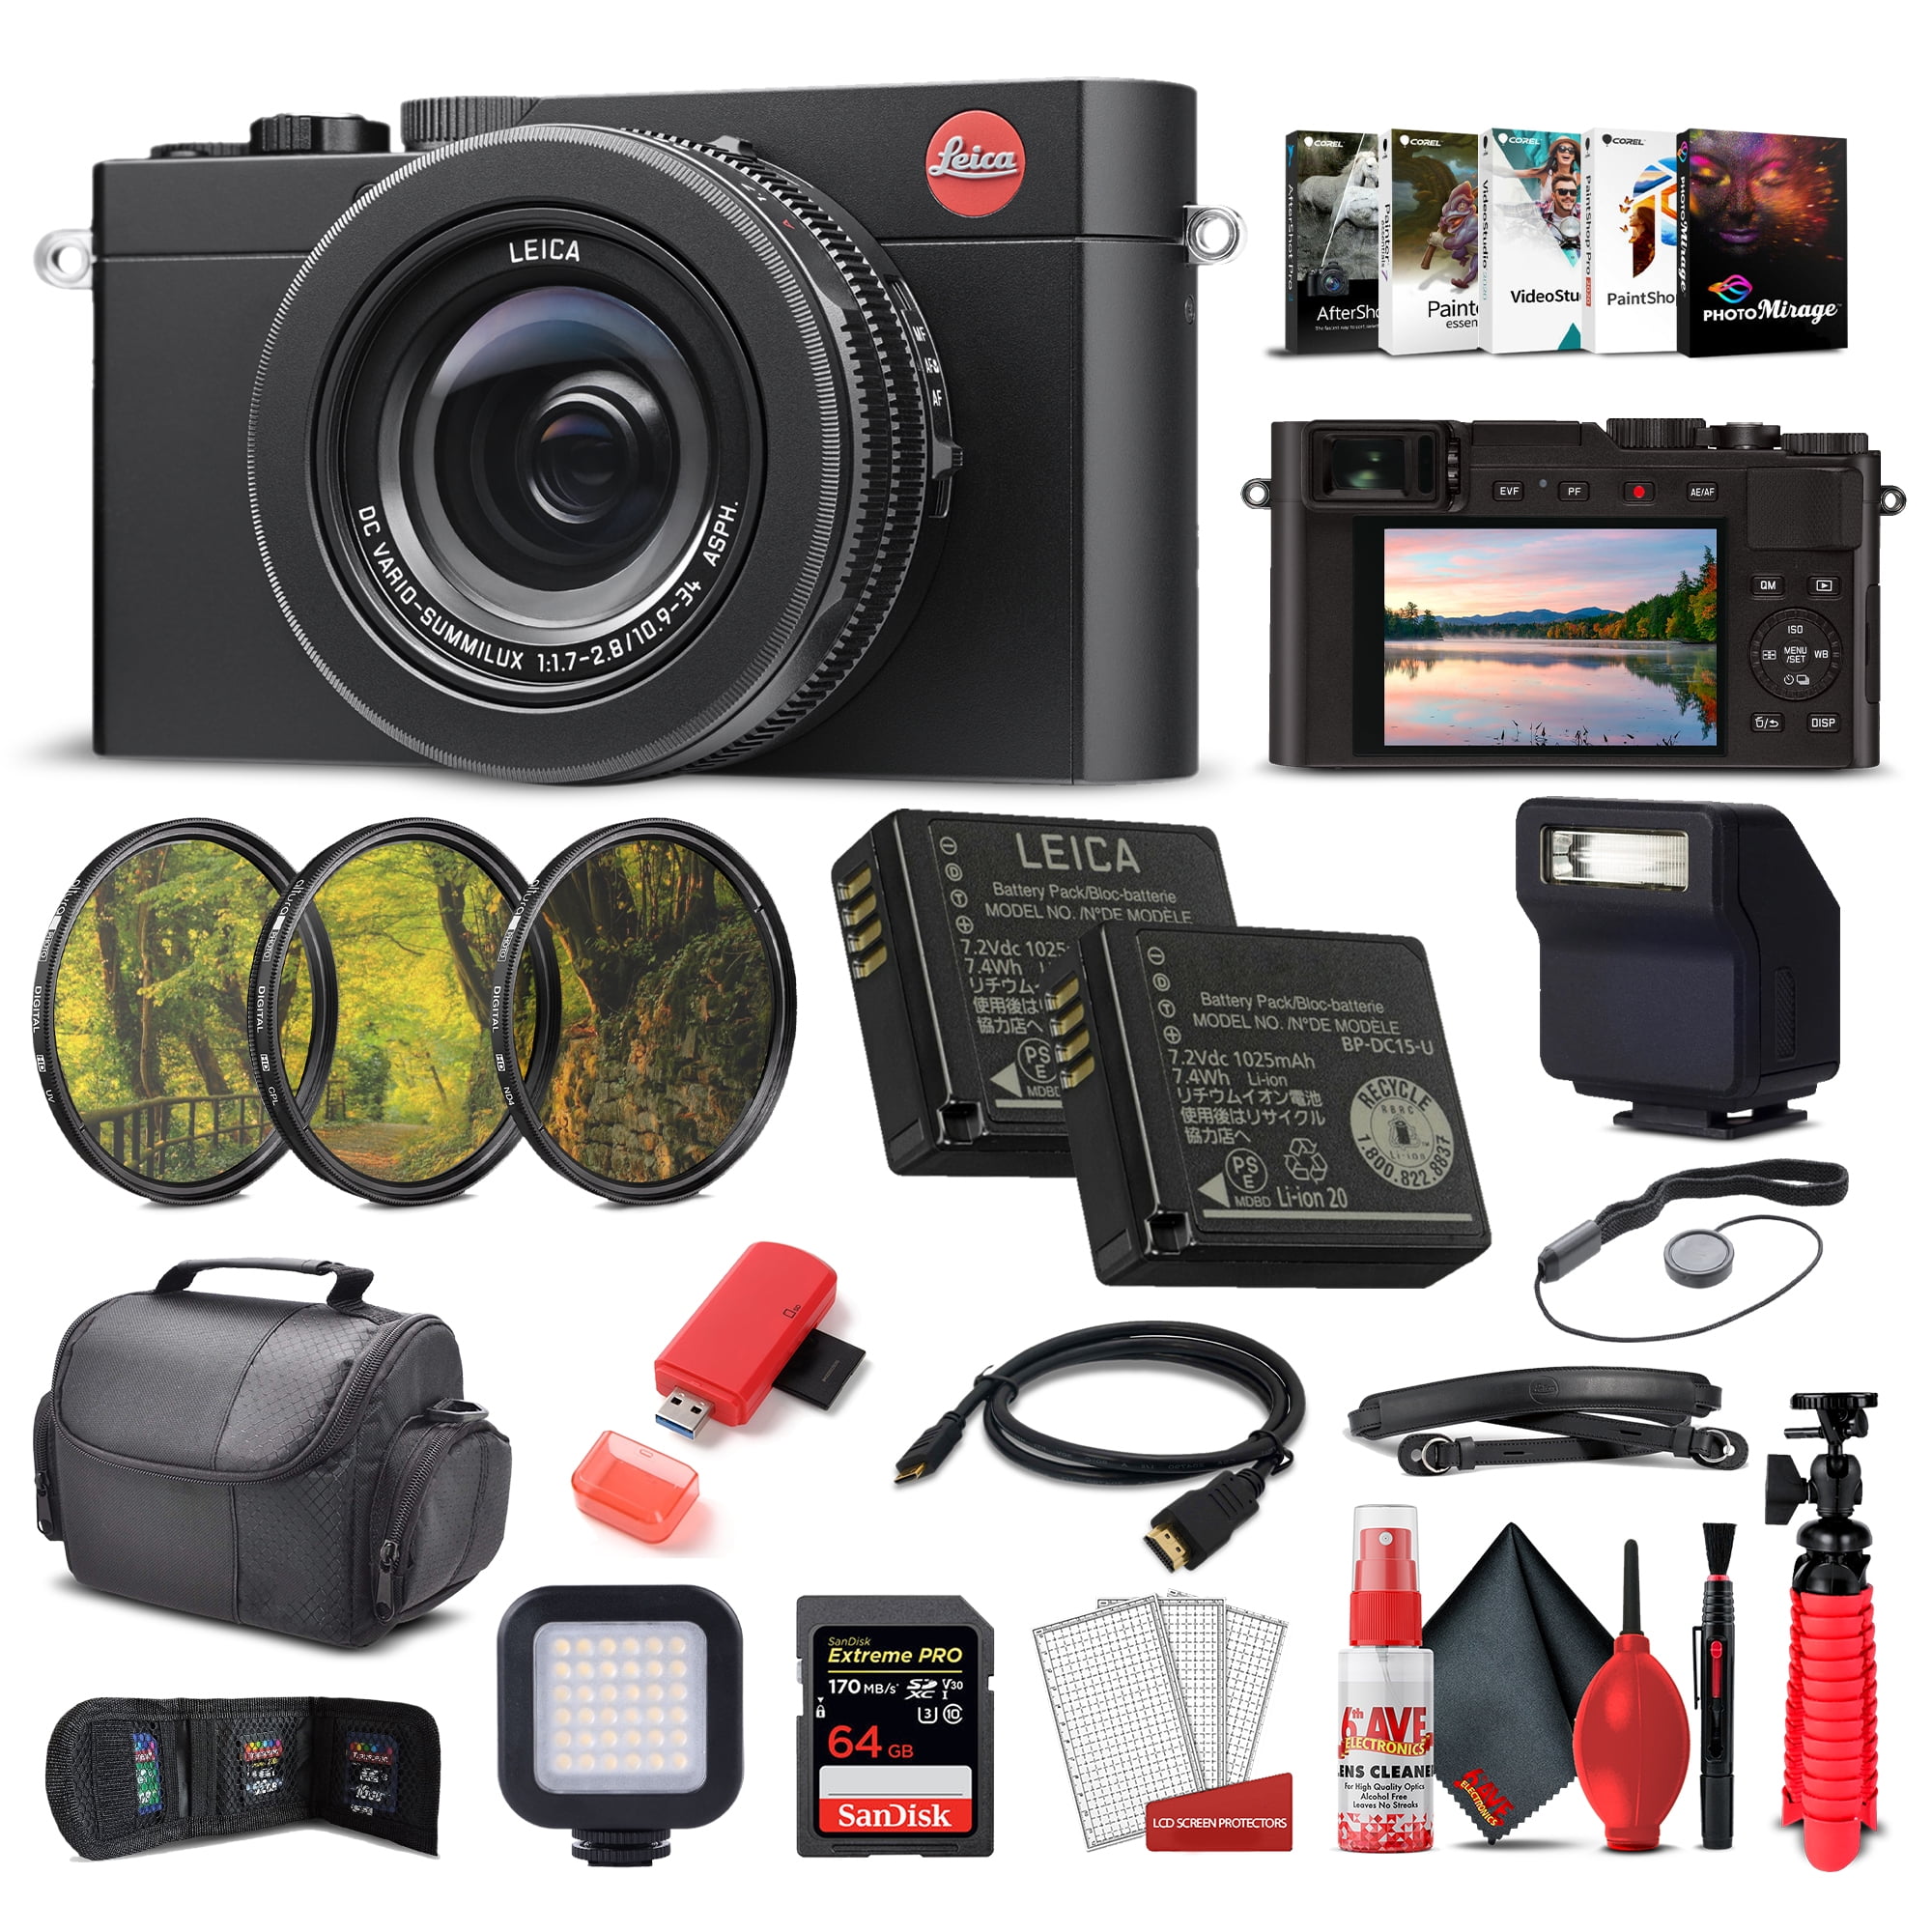 Leica D - Lux 7 Digital Camera (Black) (19141) + 64GB Extreme Pro Card +  Corel Photo Software + Extra Battery + Portable LED Light + Card Reader + 3